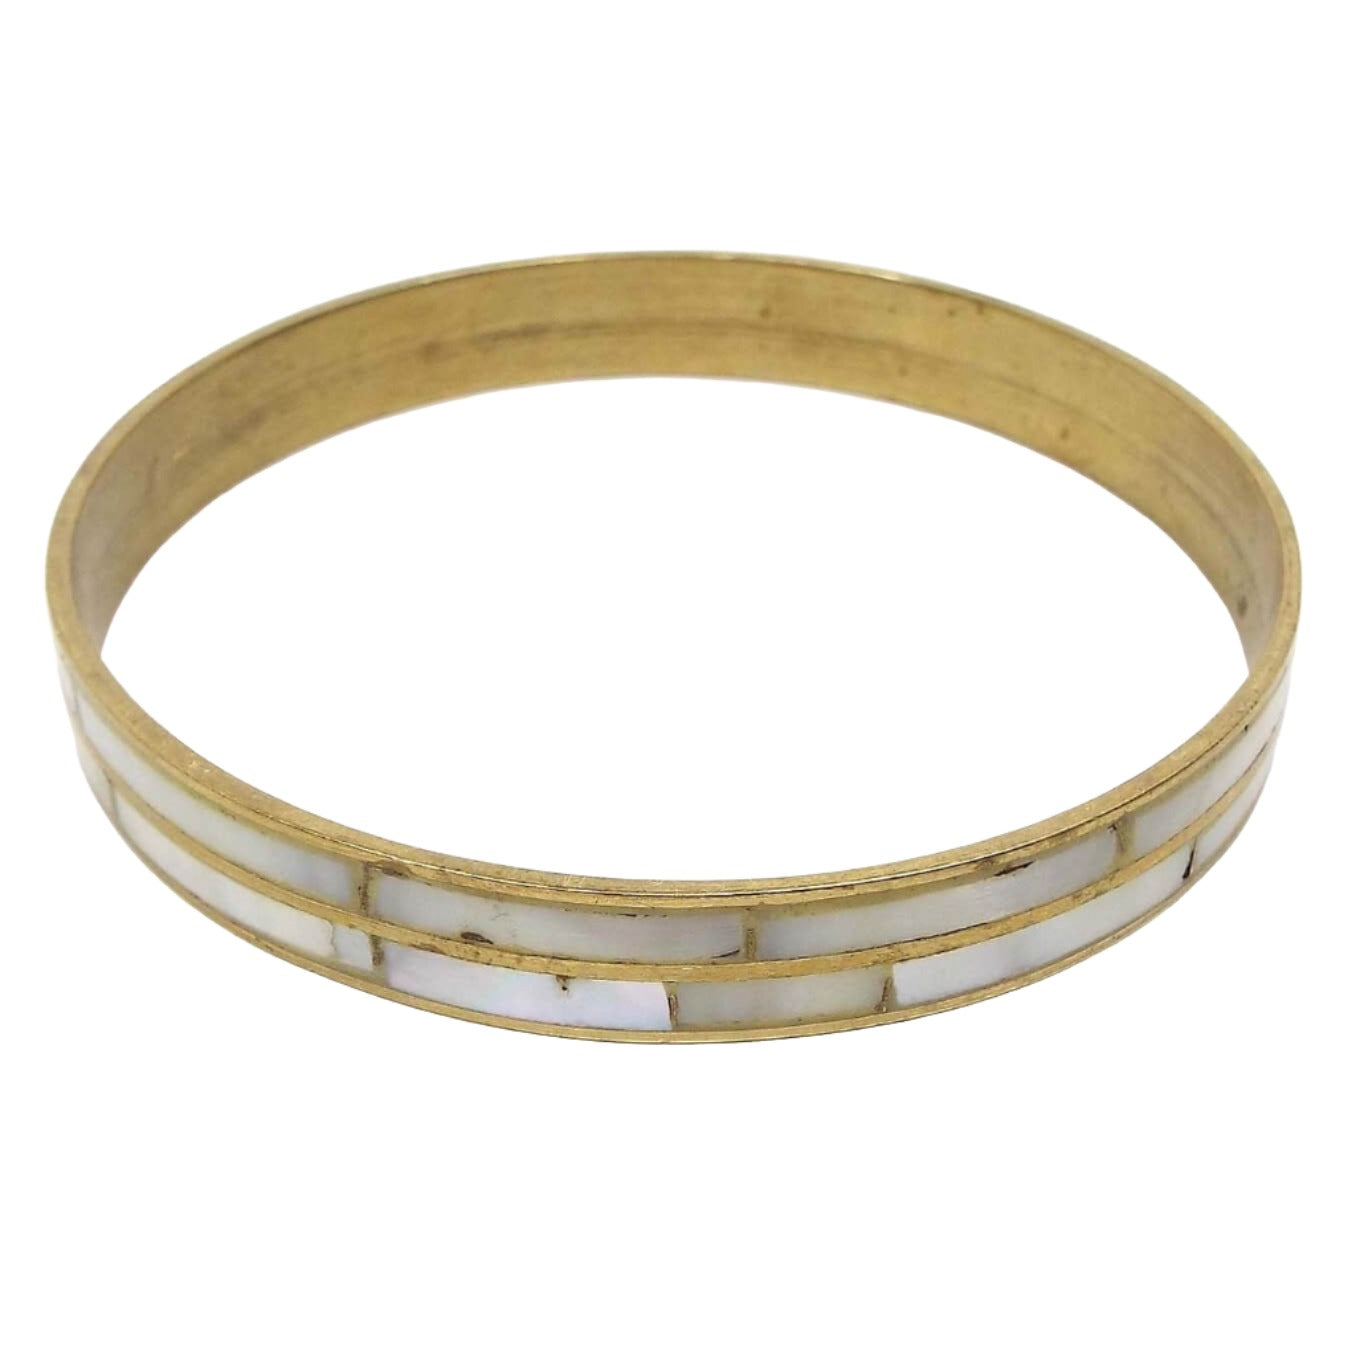 Angled view of the retro vintage brass bangle bracelet. The brass has a darkened patina for an antiqued gold kind of look. There are two rows of inlaid mother of pearl shell around the bracelet.